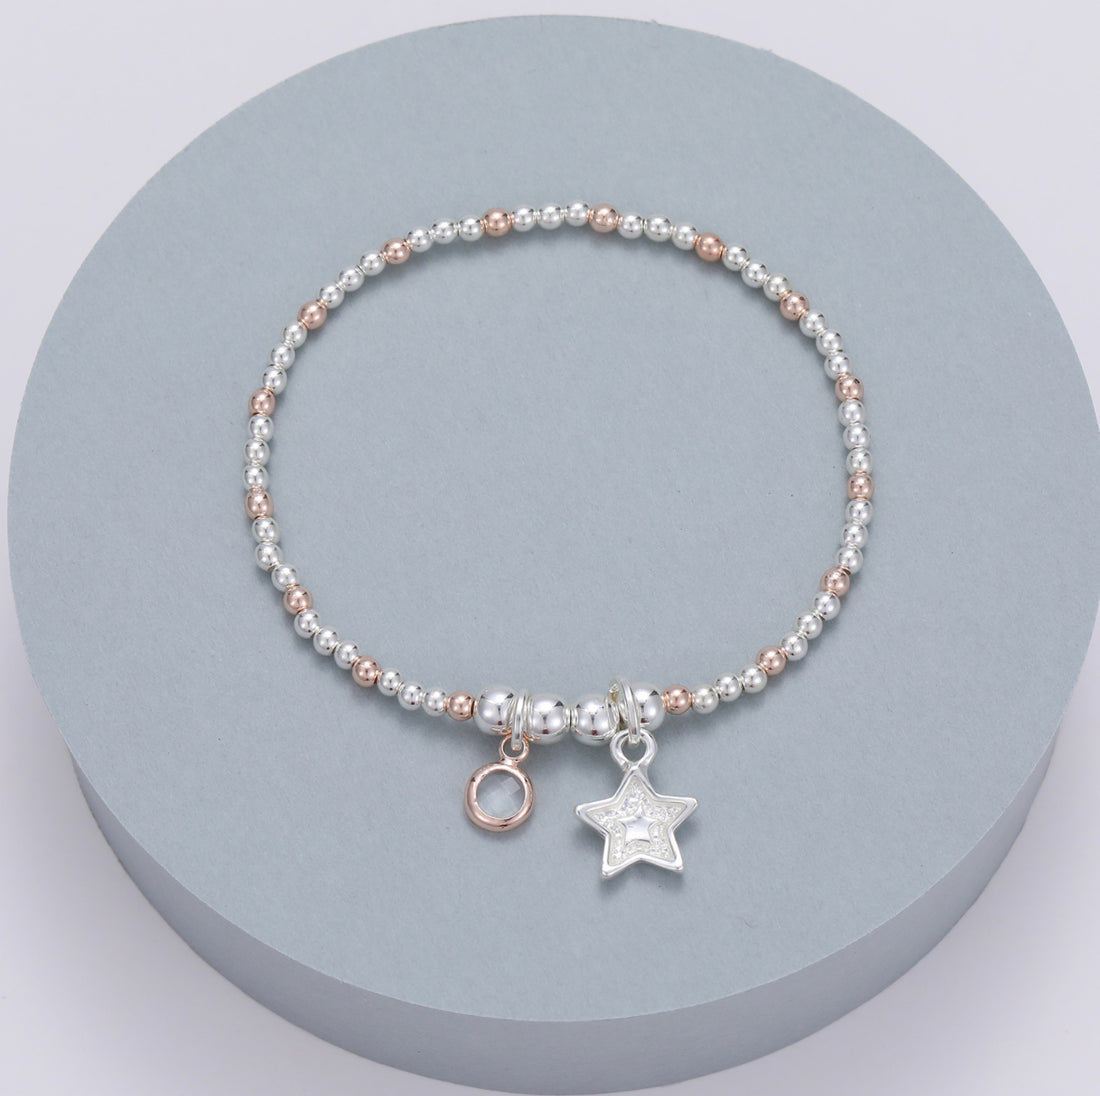 Beaded Bracelet In Multi with Star and Gem Charms